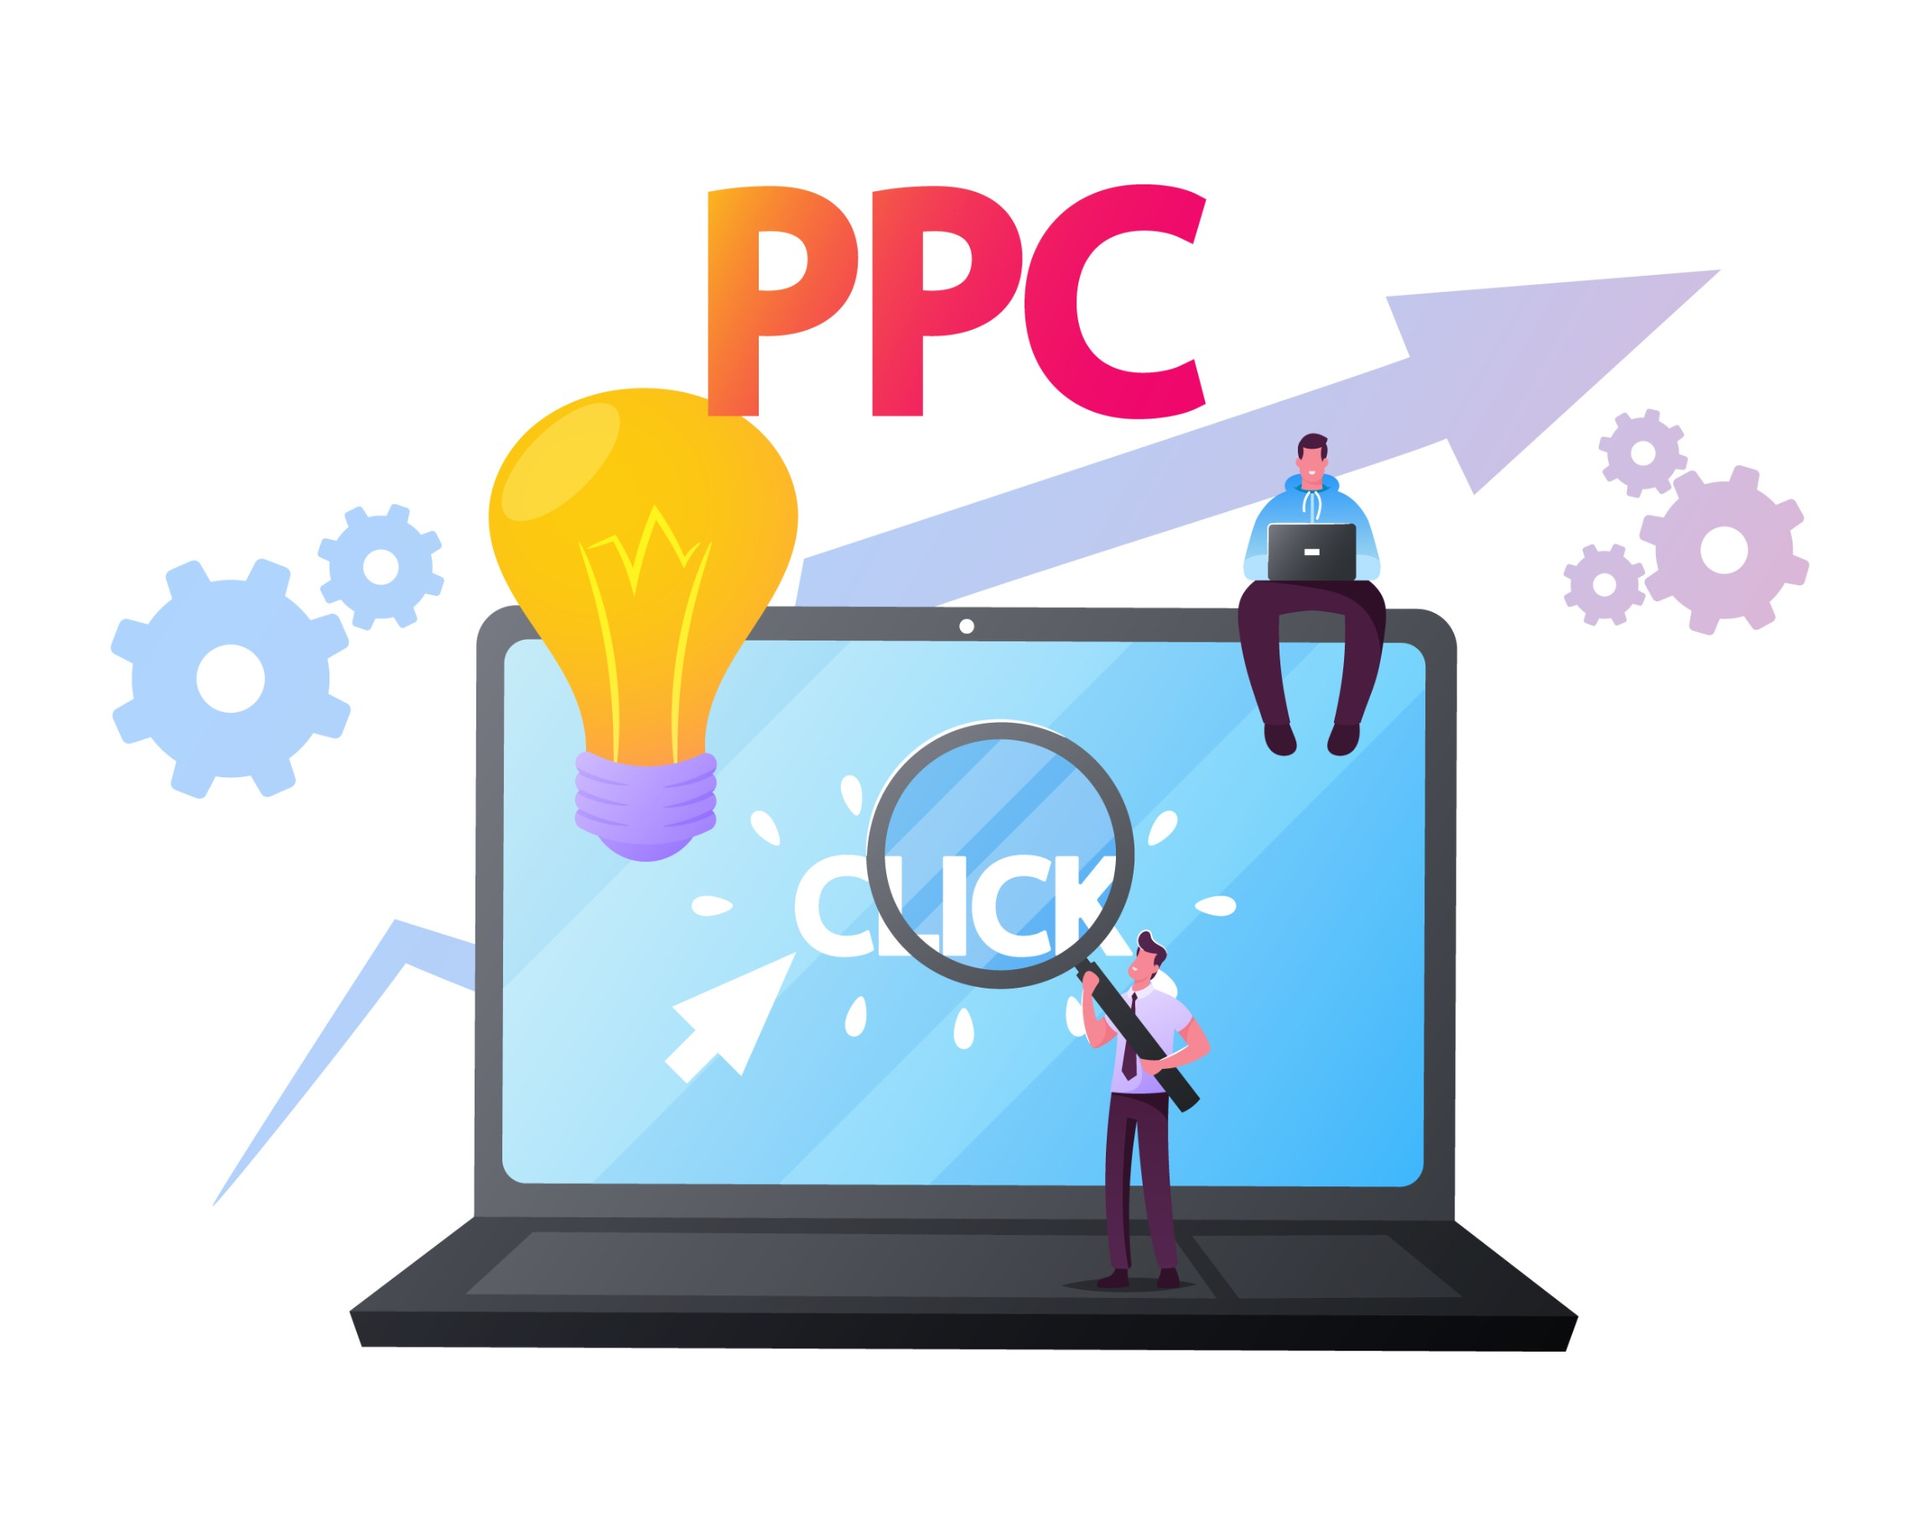 What Kinds of Businesses Should Use PPC Advertising?